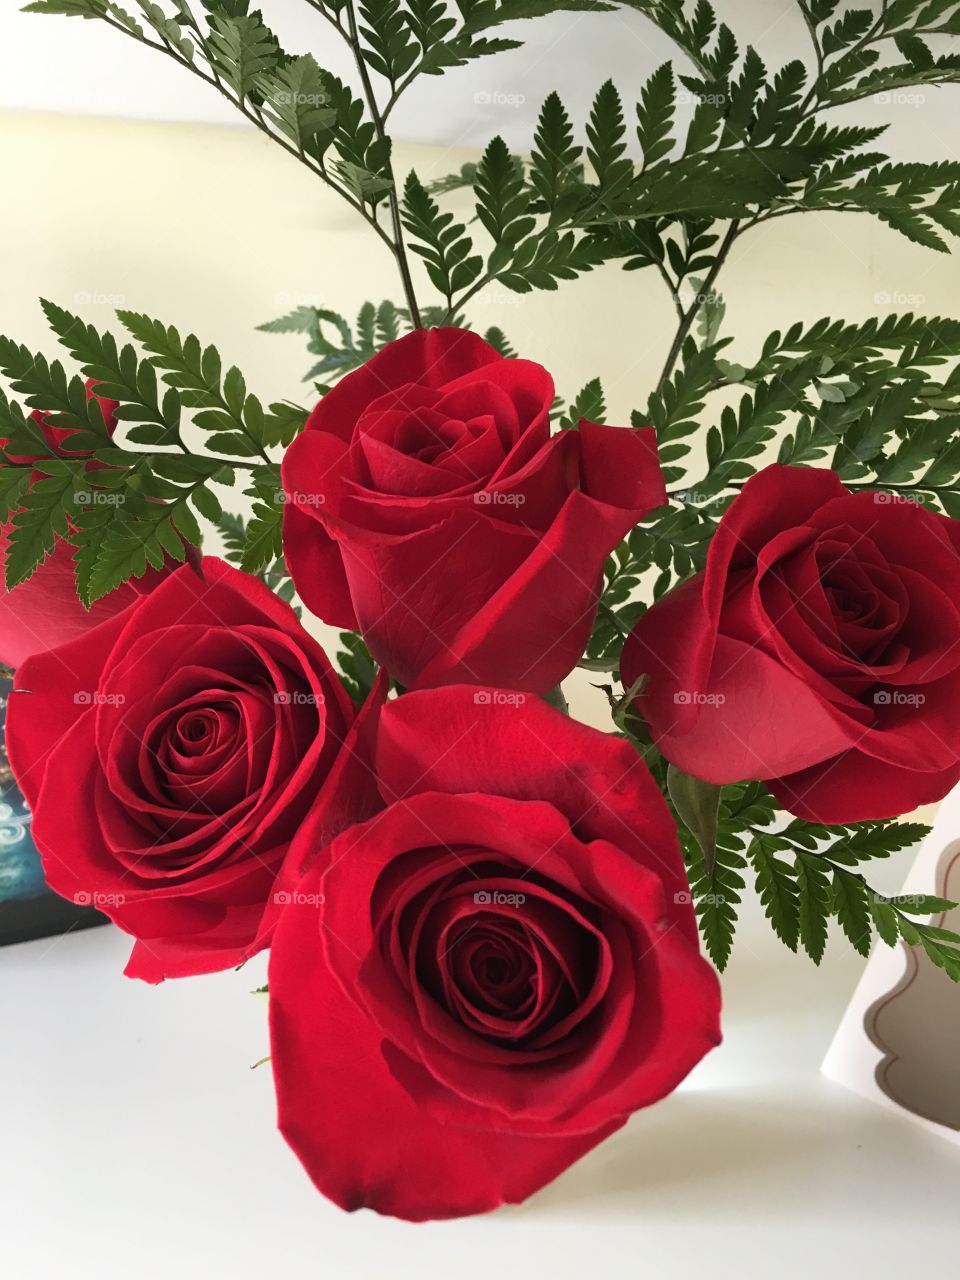 Red roses for our anniversary 